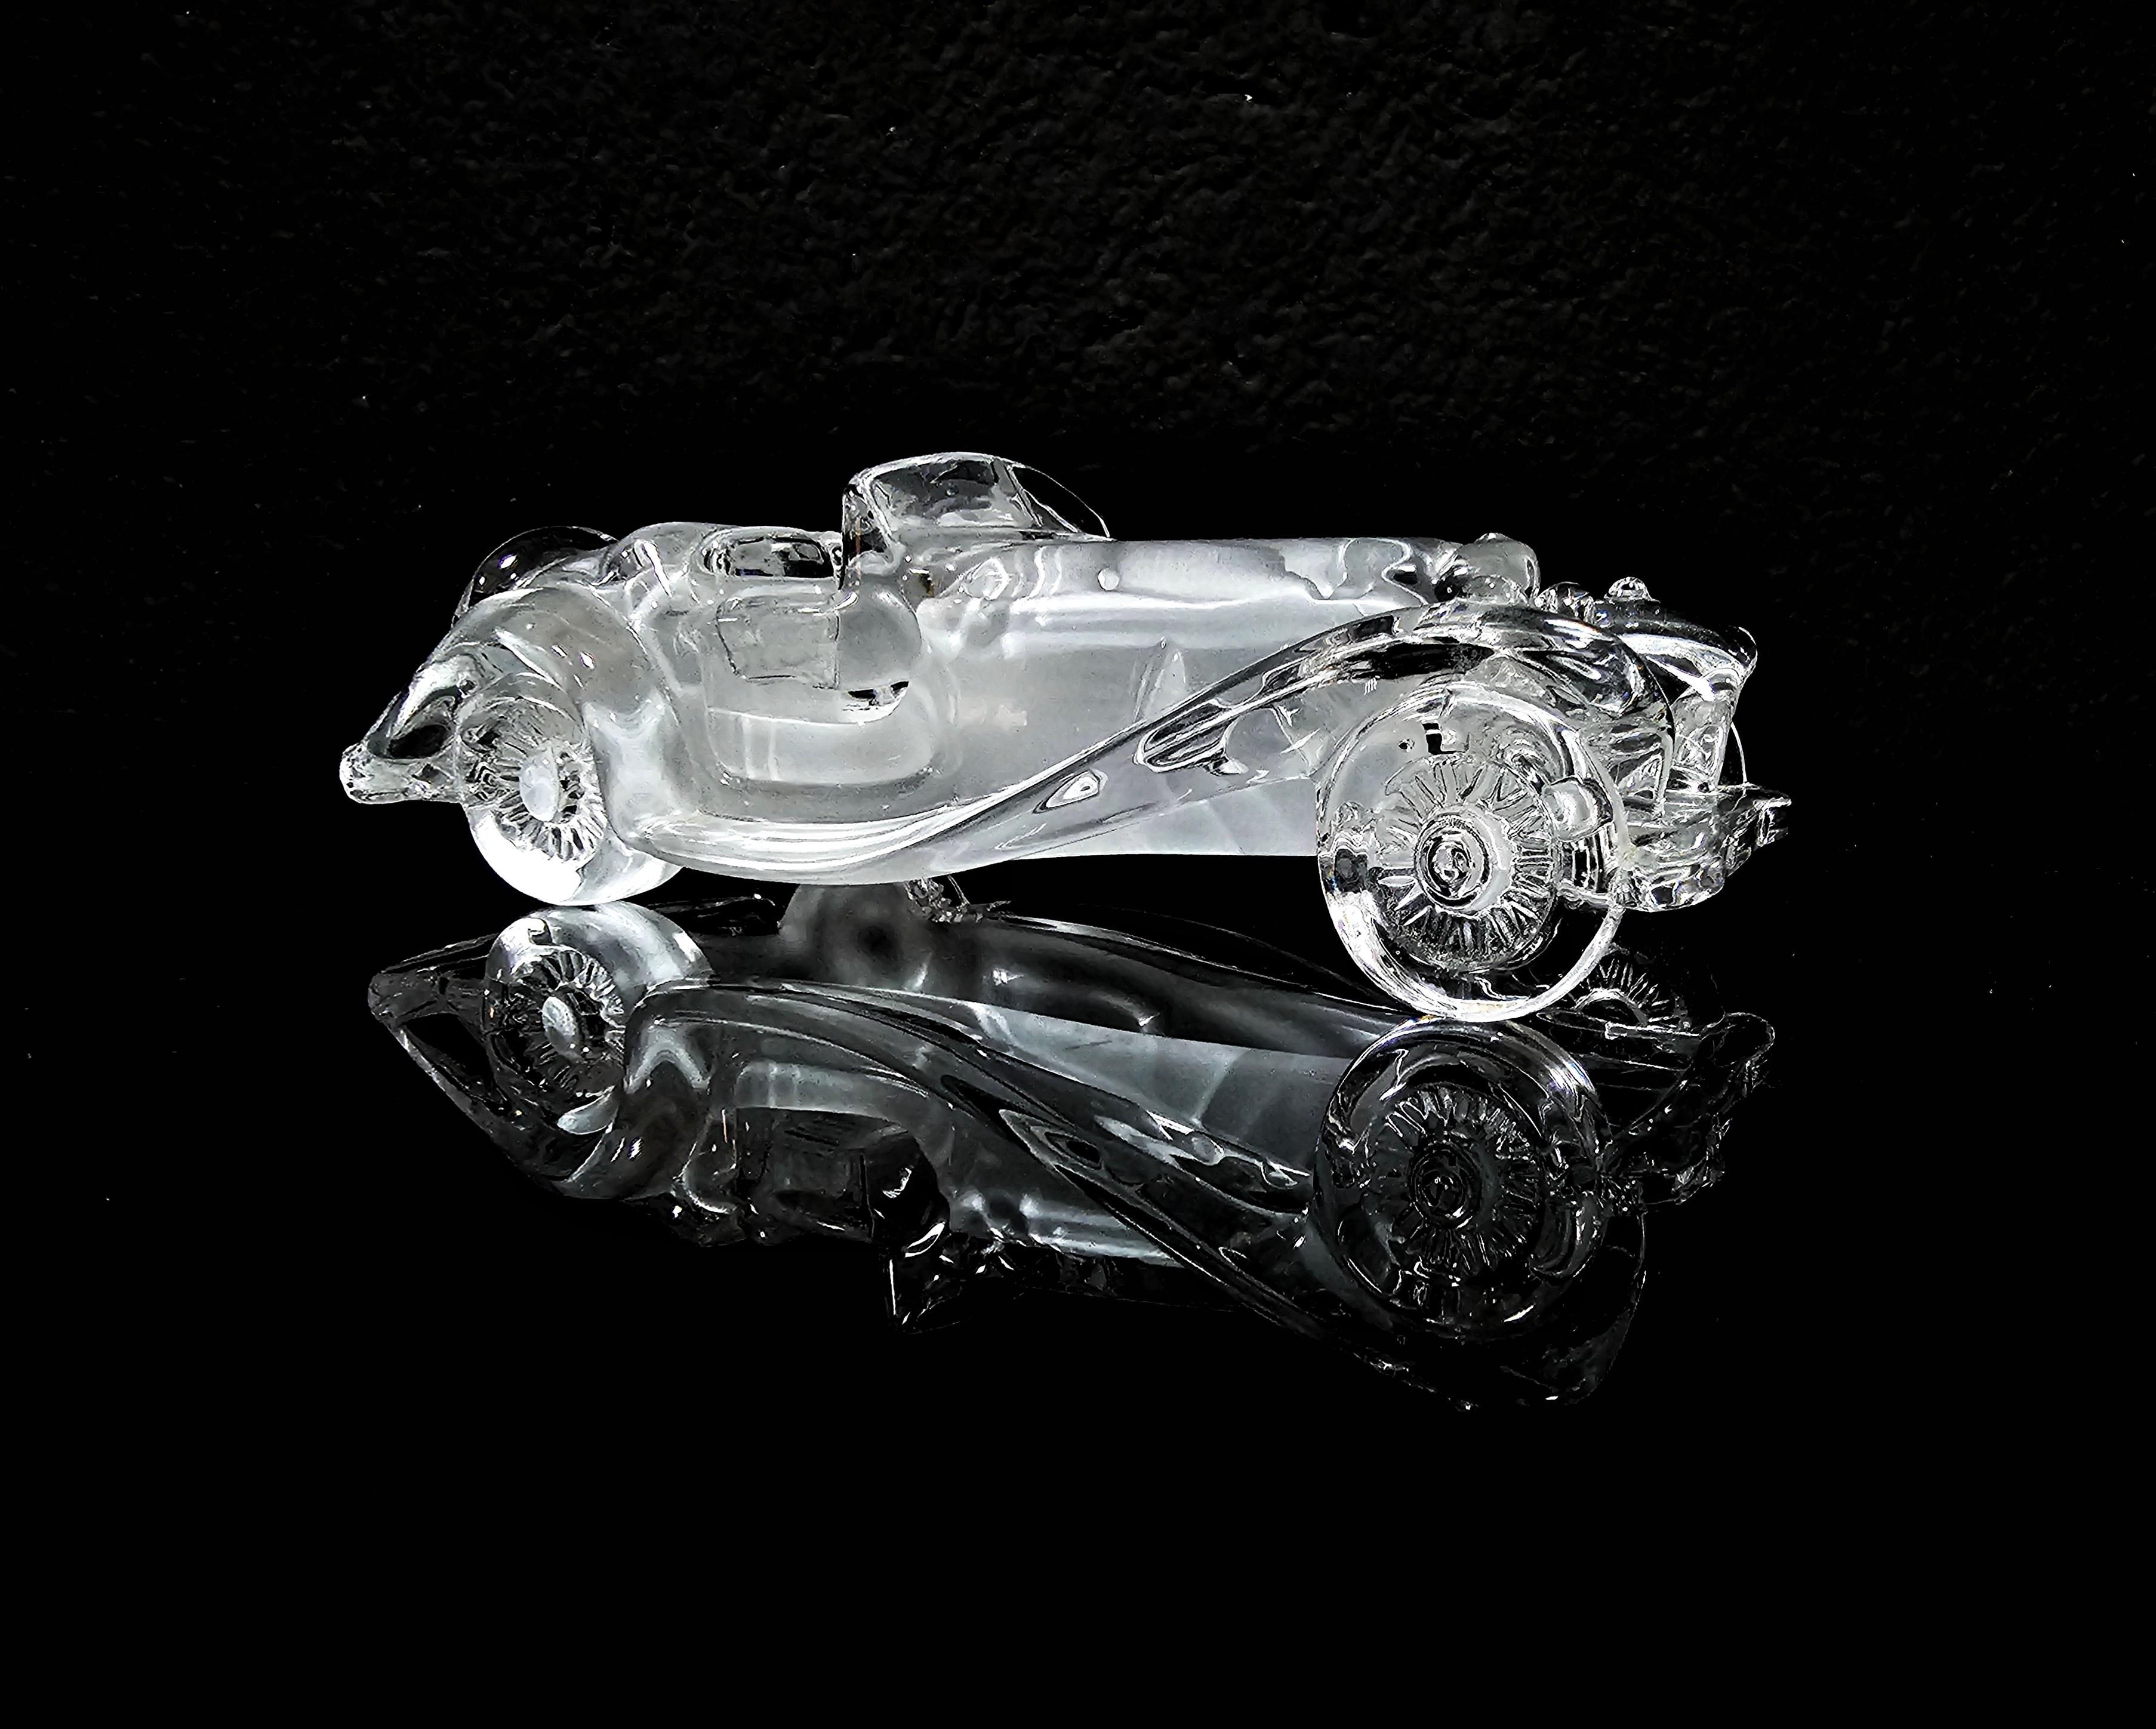 In this listing you will find a Vintage Crystal Glass Figurine of the Bugatti 55 Roadster, manufactured by Daum Glass. Attention to detail is what makes Dum exceptional glass maker. Two same figurines of Bugatti are available, one in clear glass,